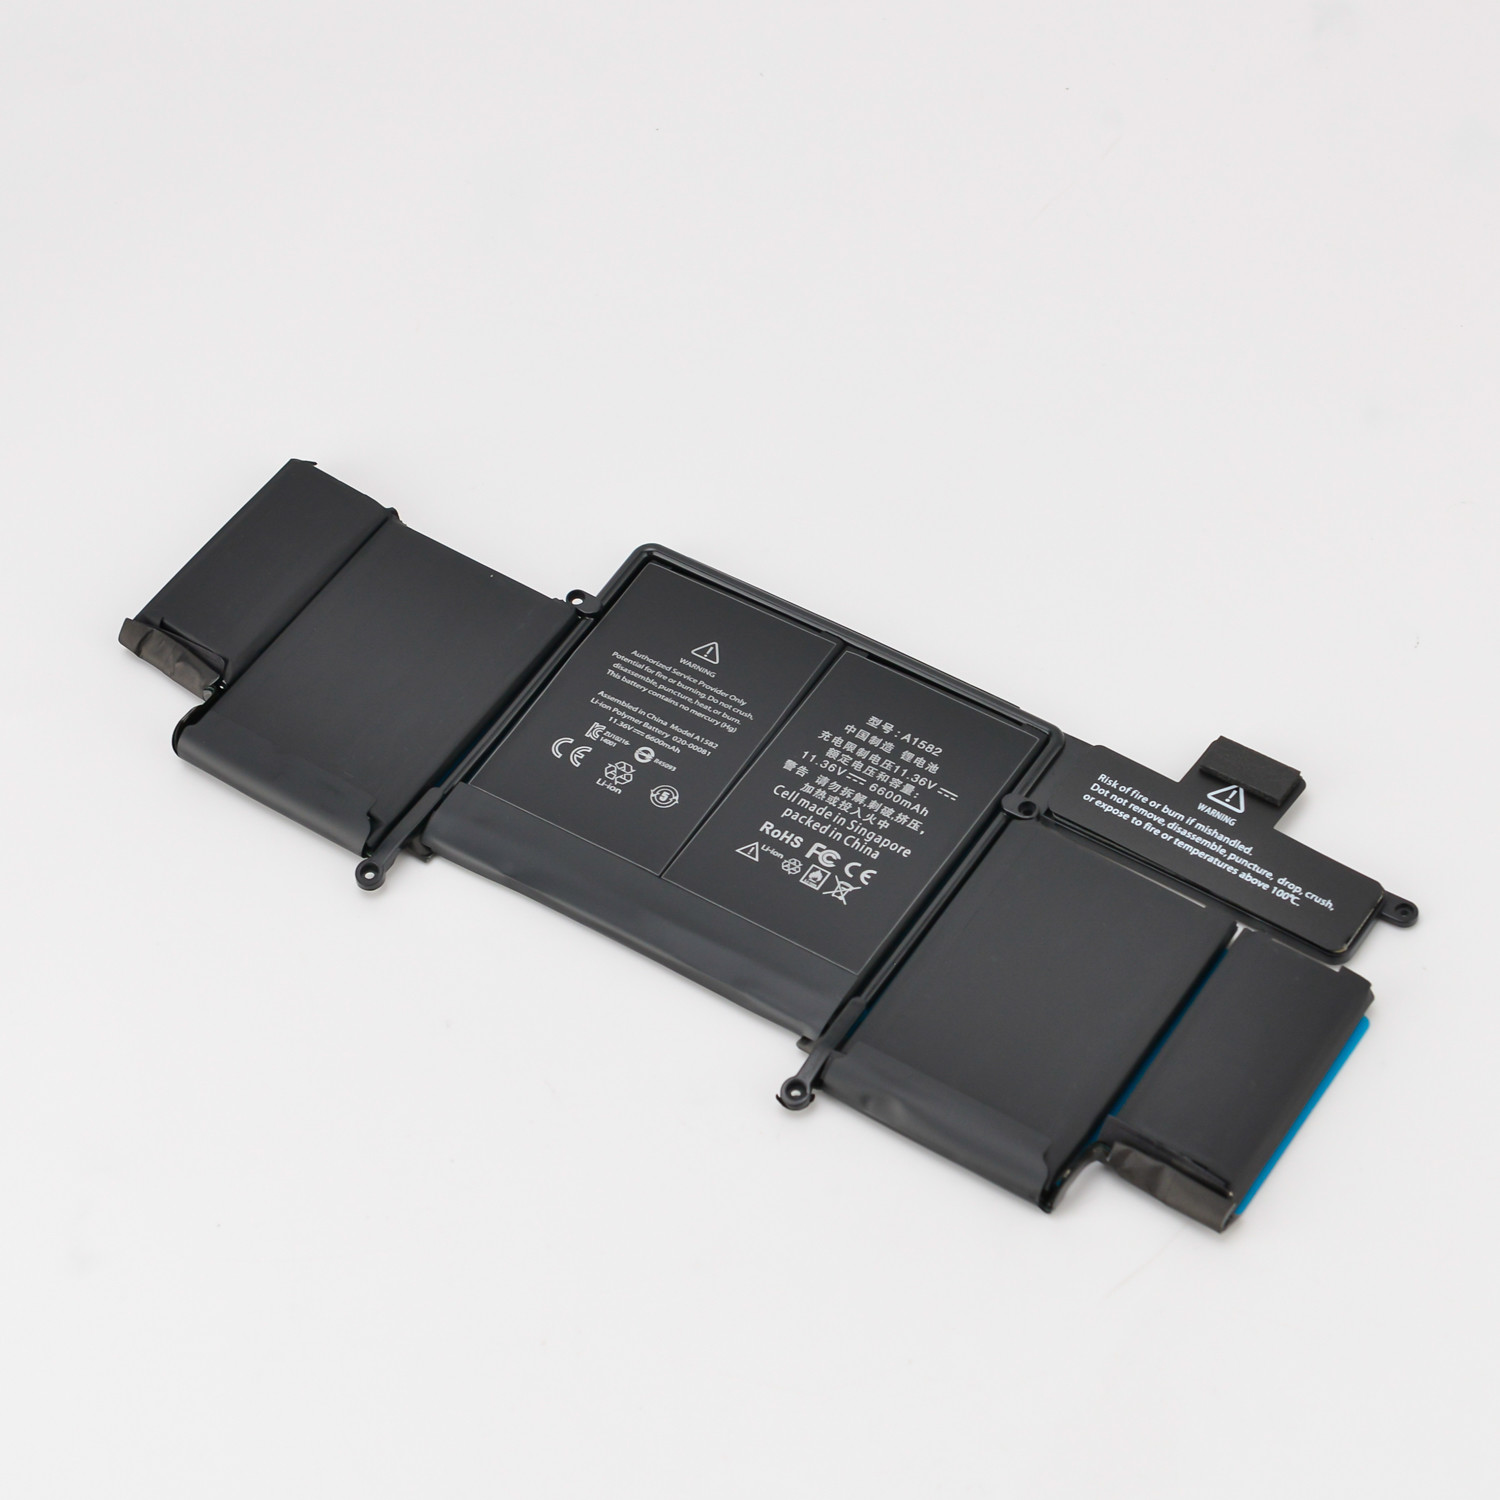 11.42V 74.9Wh Laptop Battery A1582 for Macbook Retina Pro 13 A1502 Early 2015 Rechargeable Battery